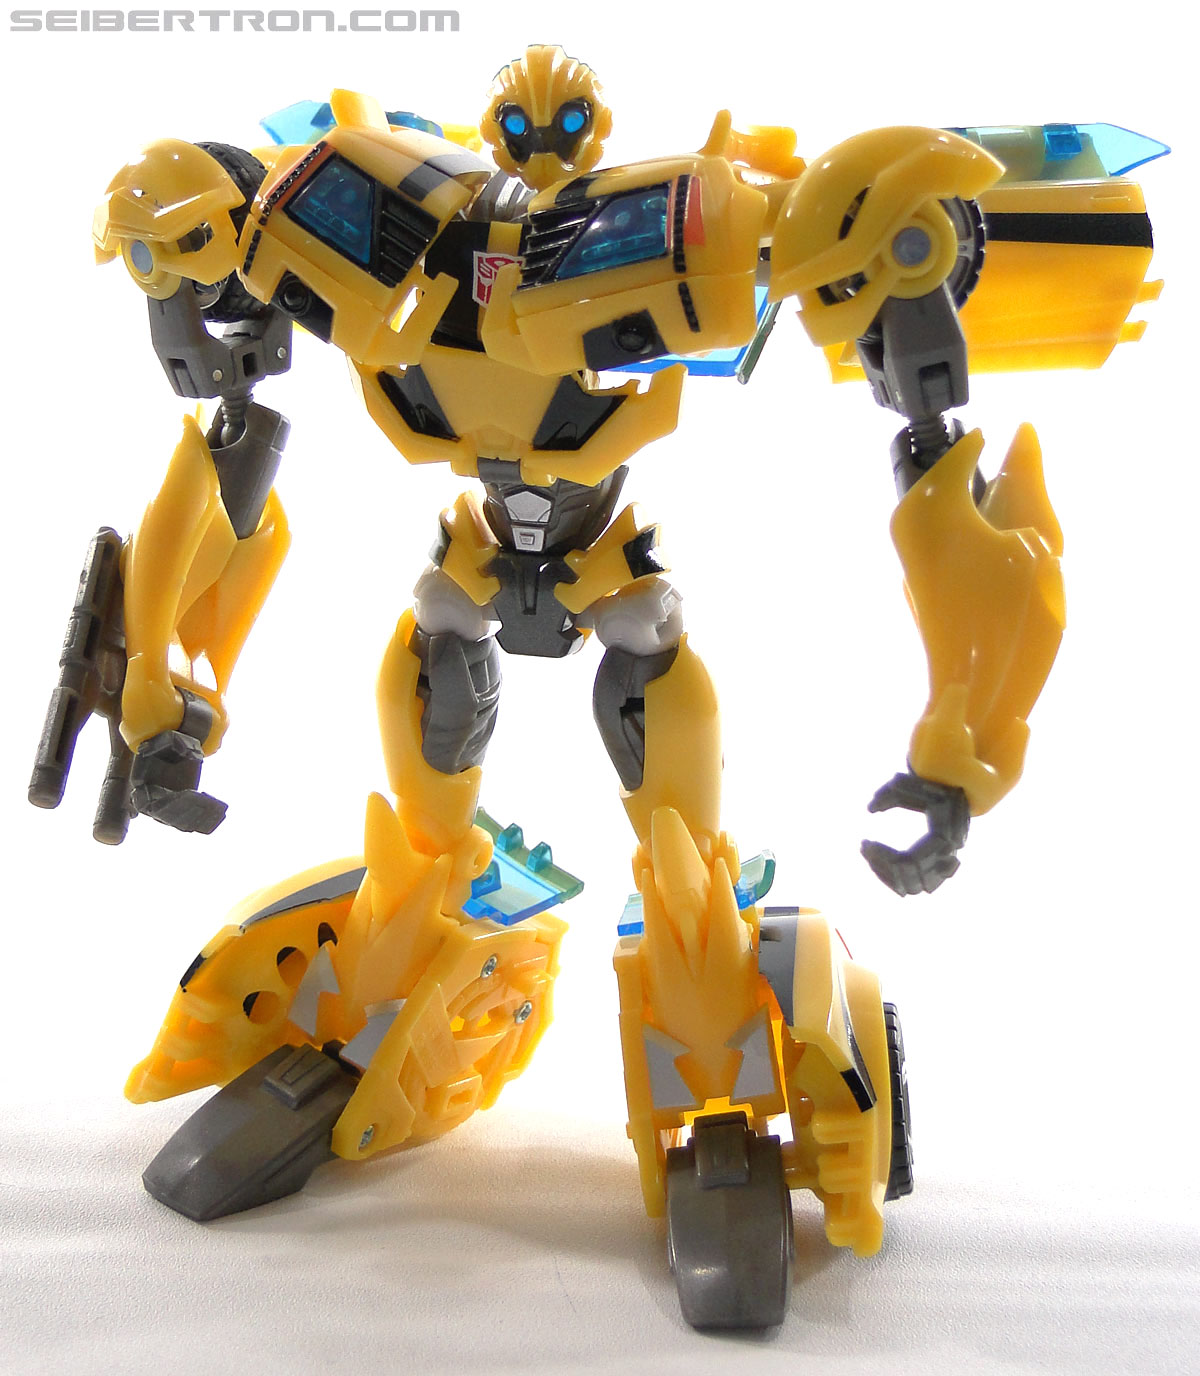 Transformers Prime: First Edition Bumblebee (Image #105 of 130)